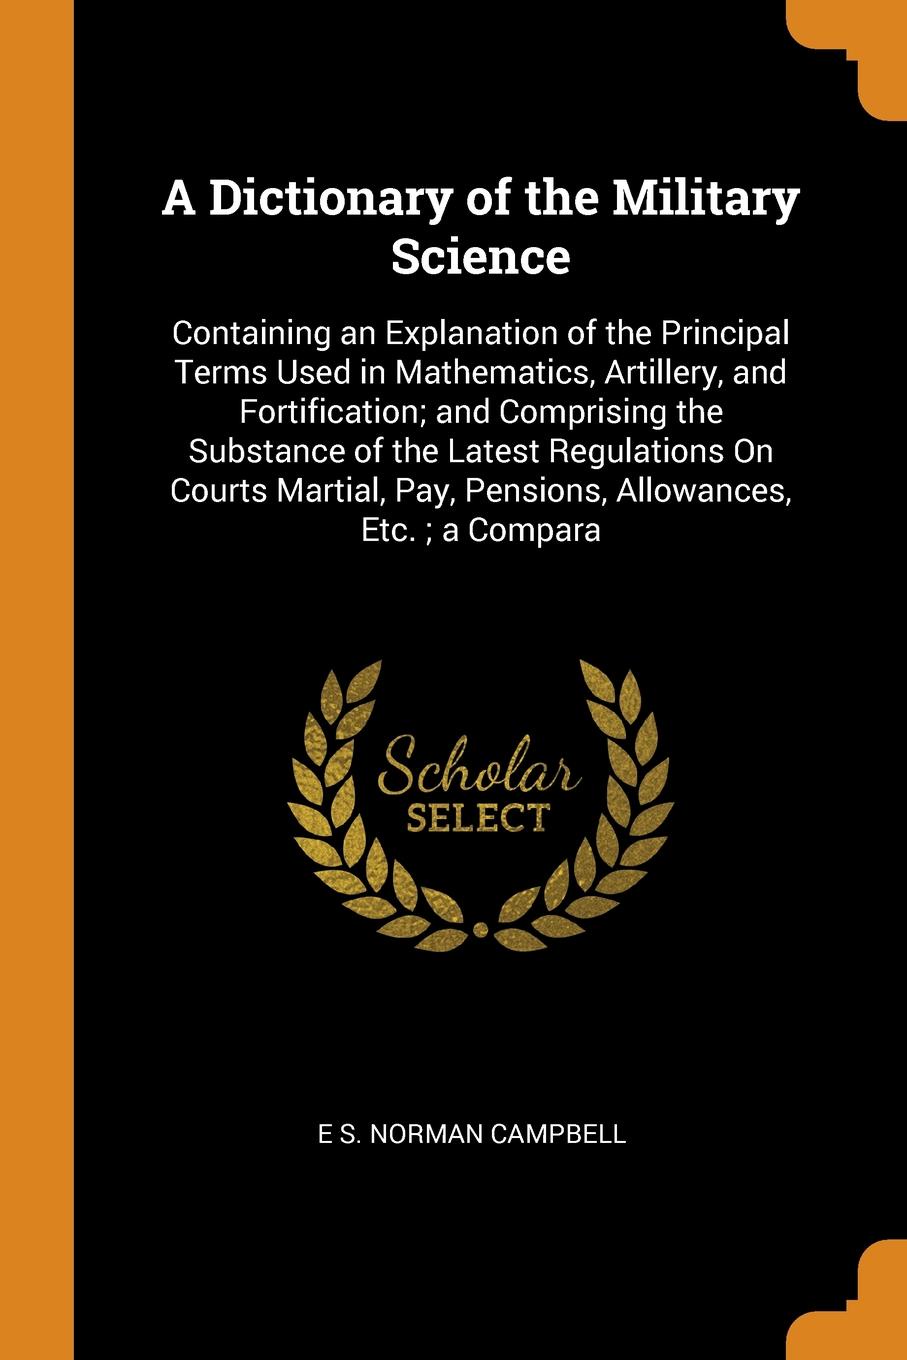 A Dictionary of the Military Science. Containing an Explanation of the Principal Terms Used in Mathematics, Artillery, and Fortification; and Comprising the Substance of the Latest Regulations On Courts Martial, Pay, Pensions, Allowances, Etc. ; a...